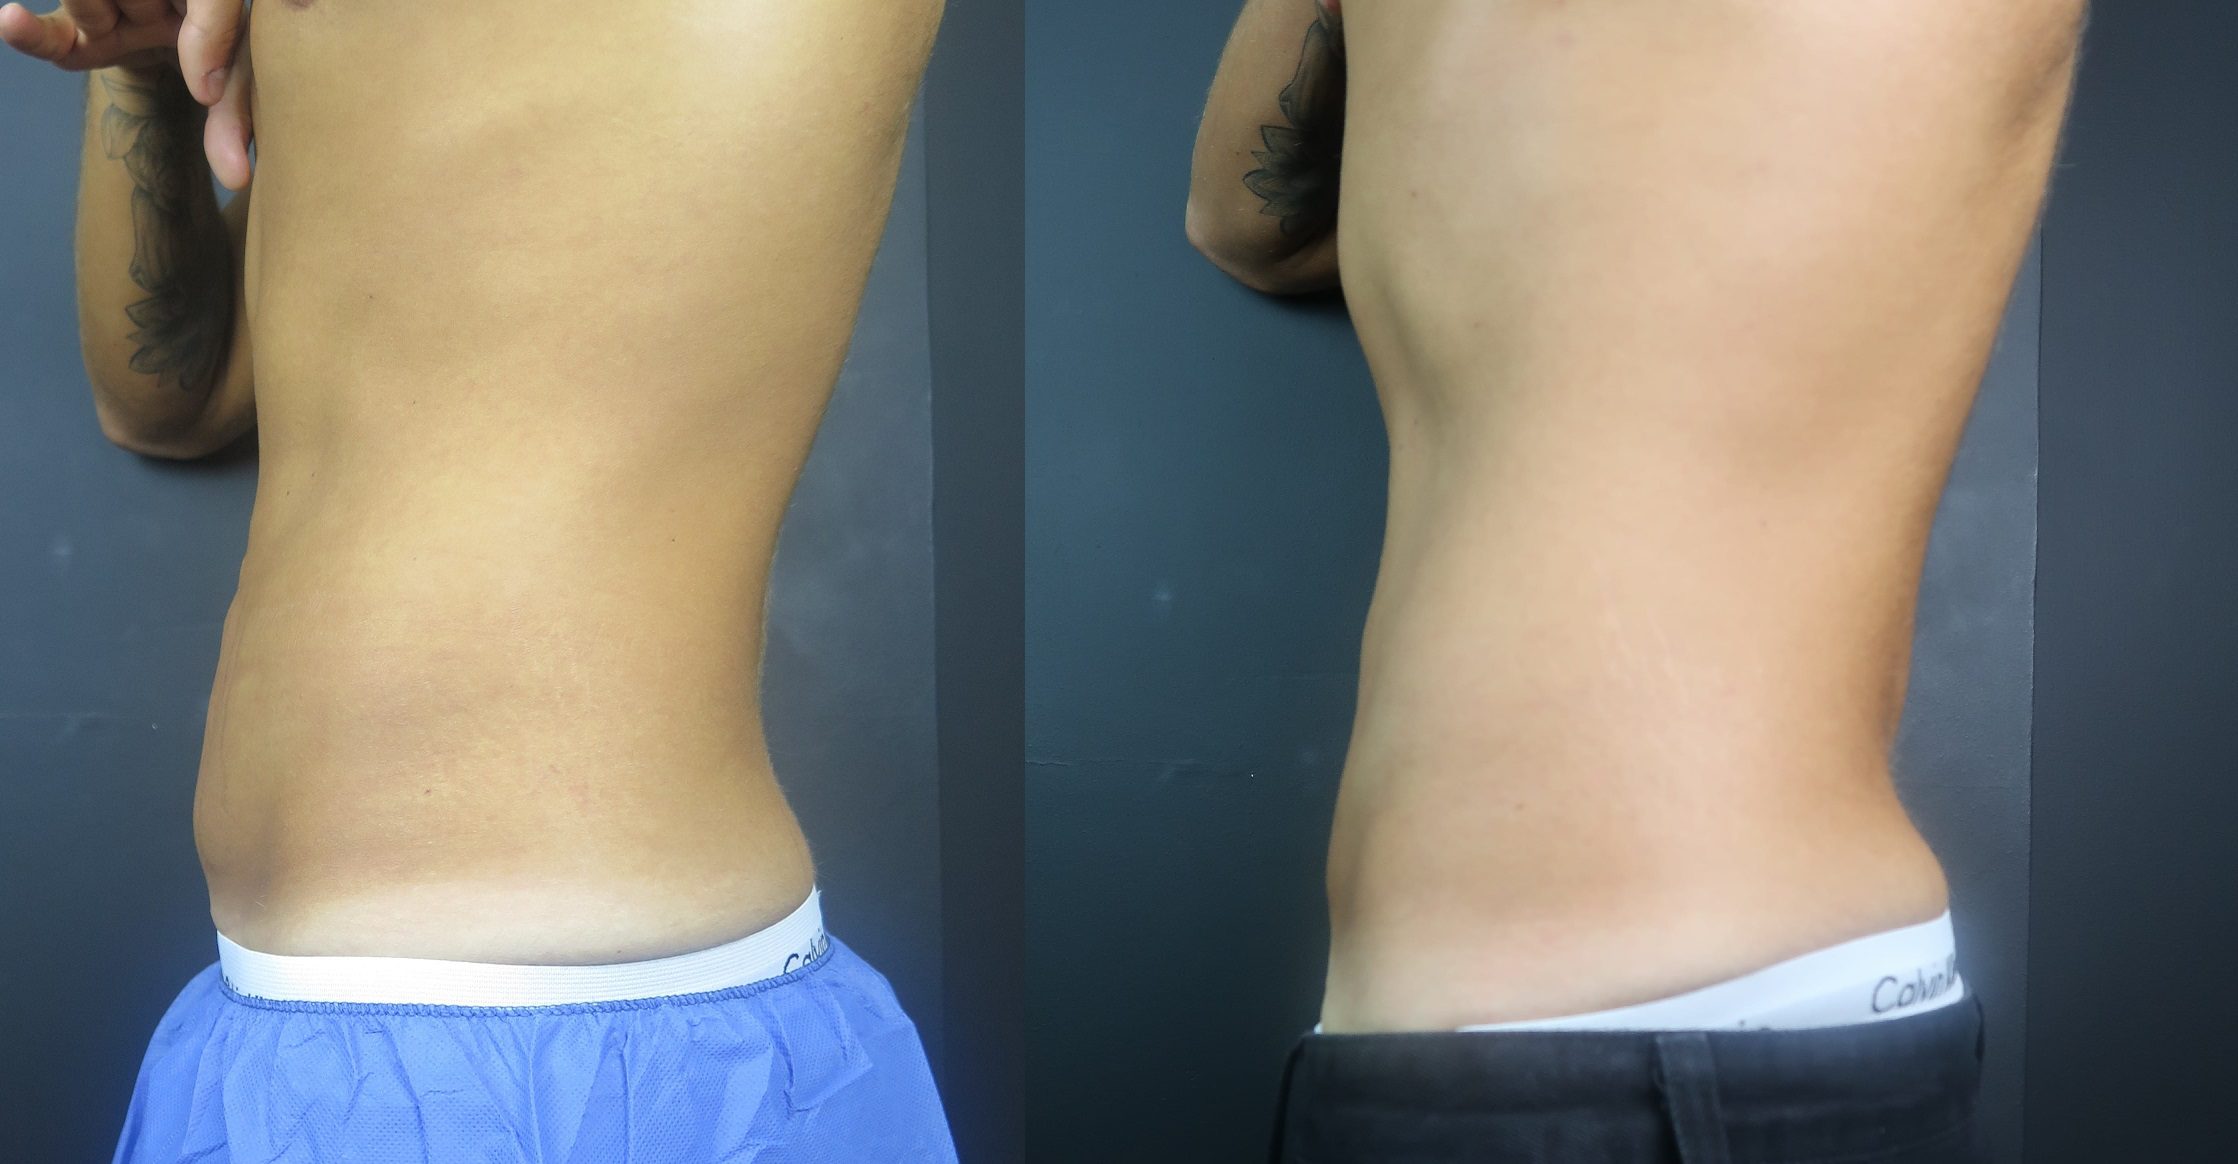 coolsculpting fat freezing belly fat before and after side